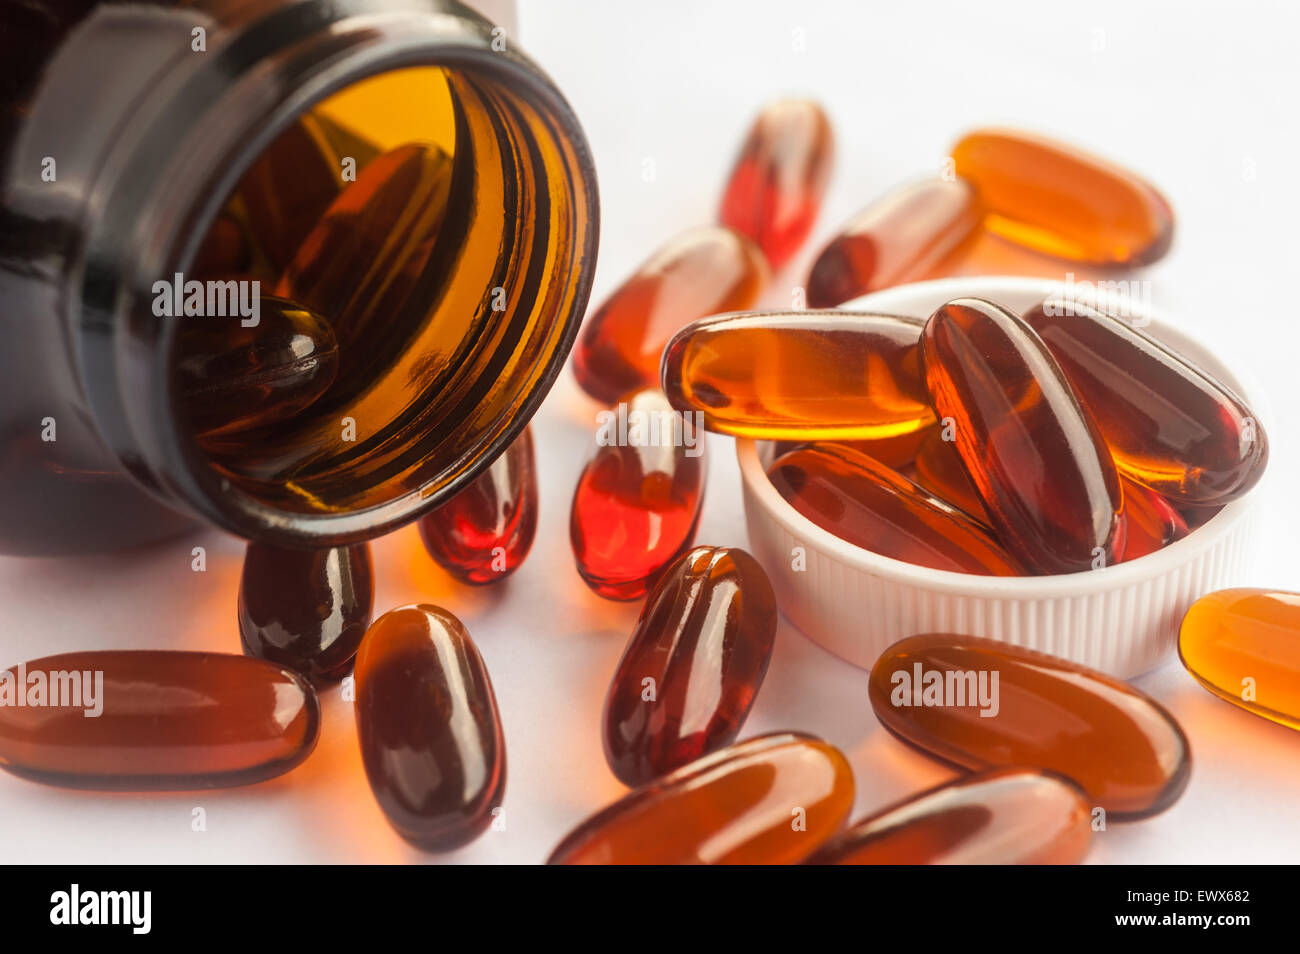 Vitamin in capsule spilling out of a bottle, Vitamin for health Stock Photo